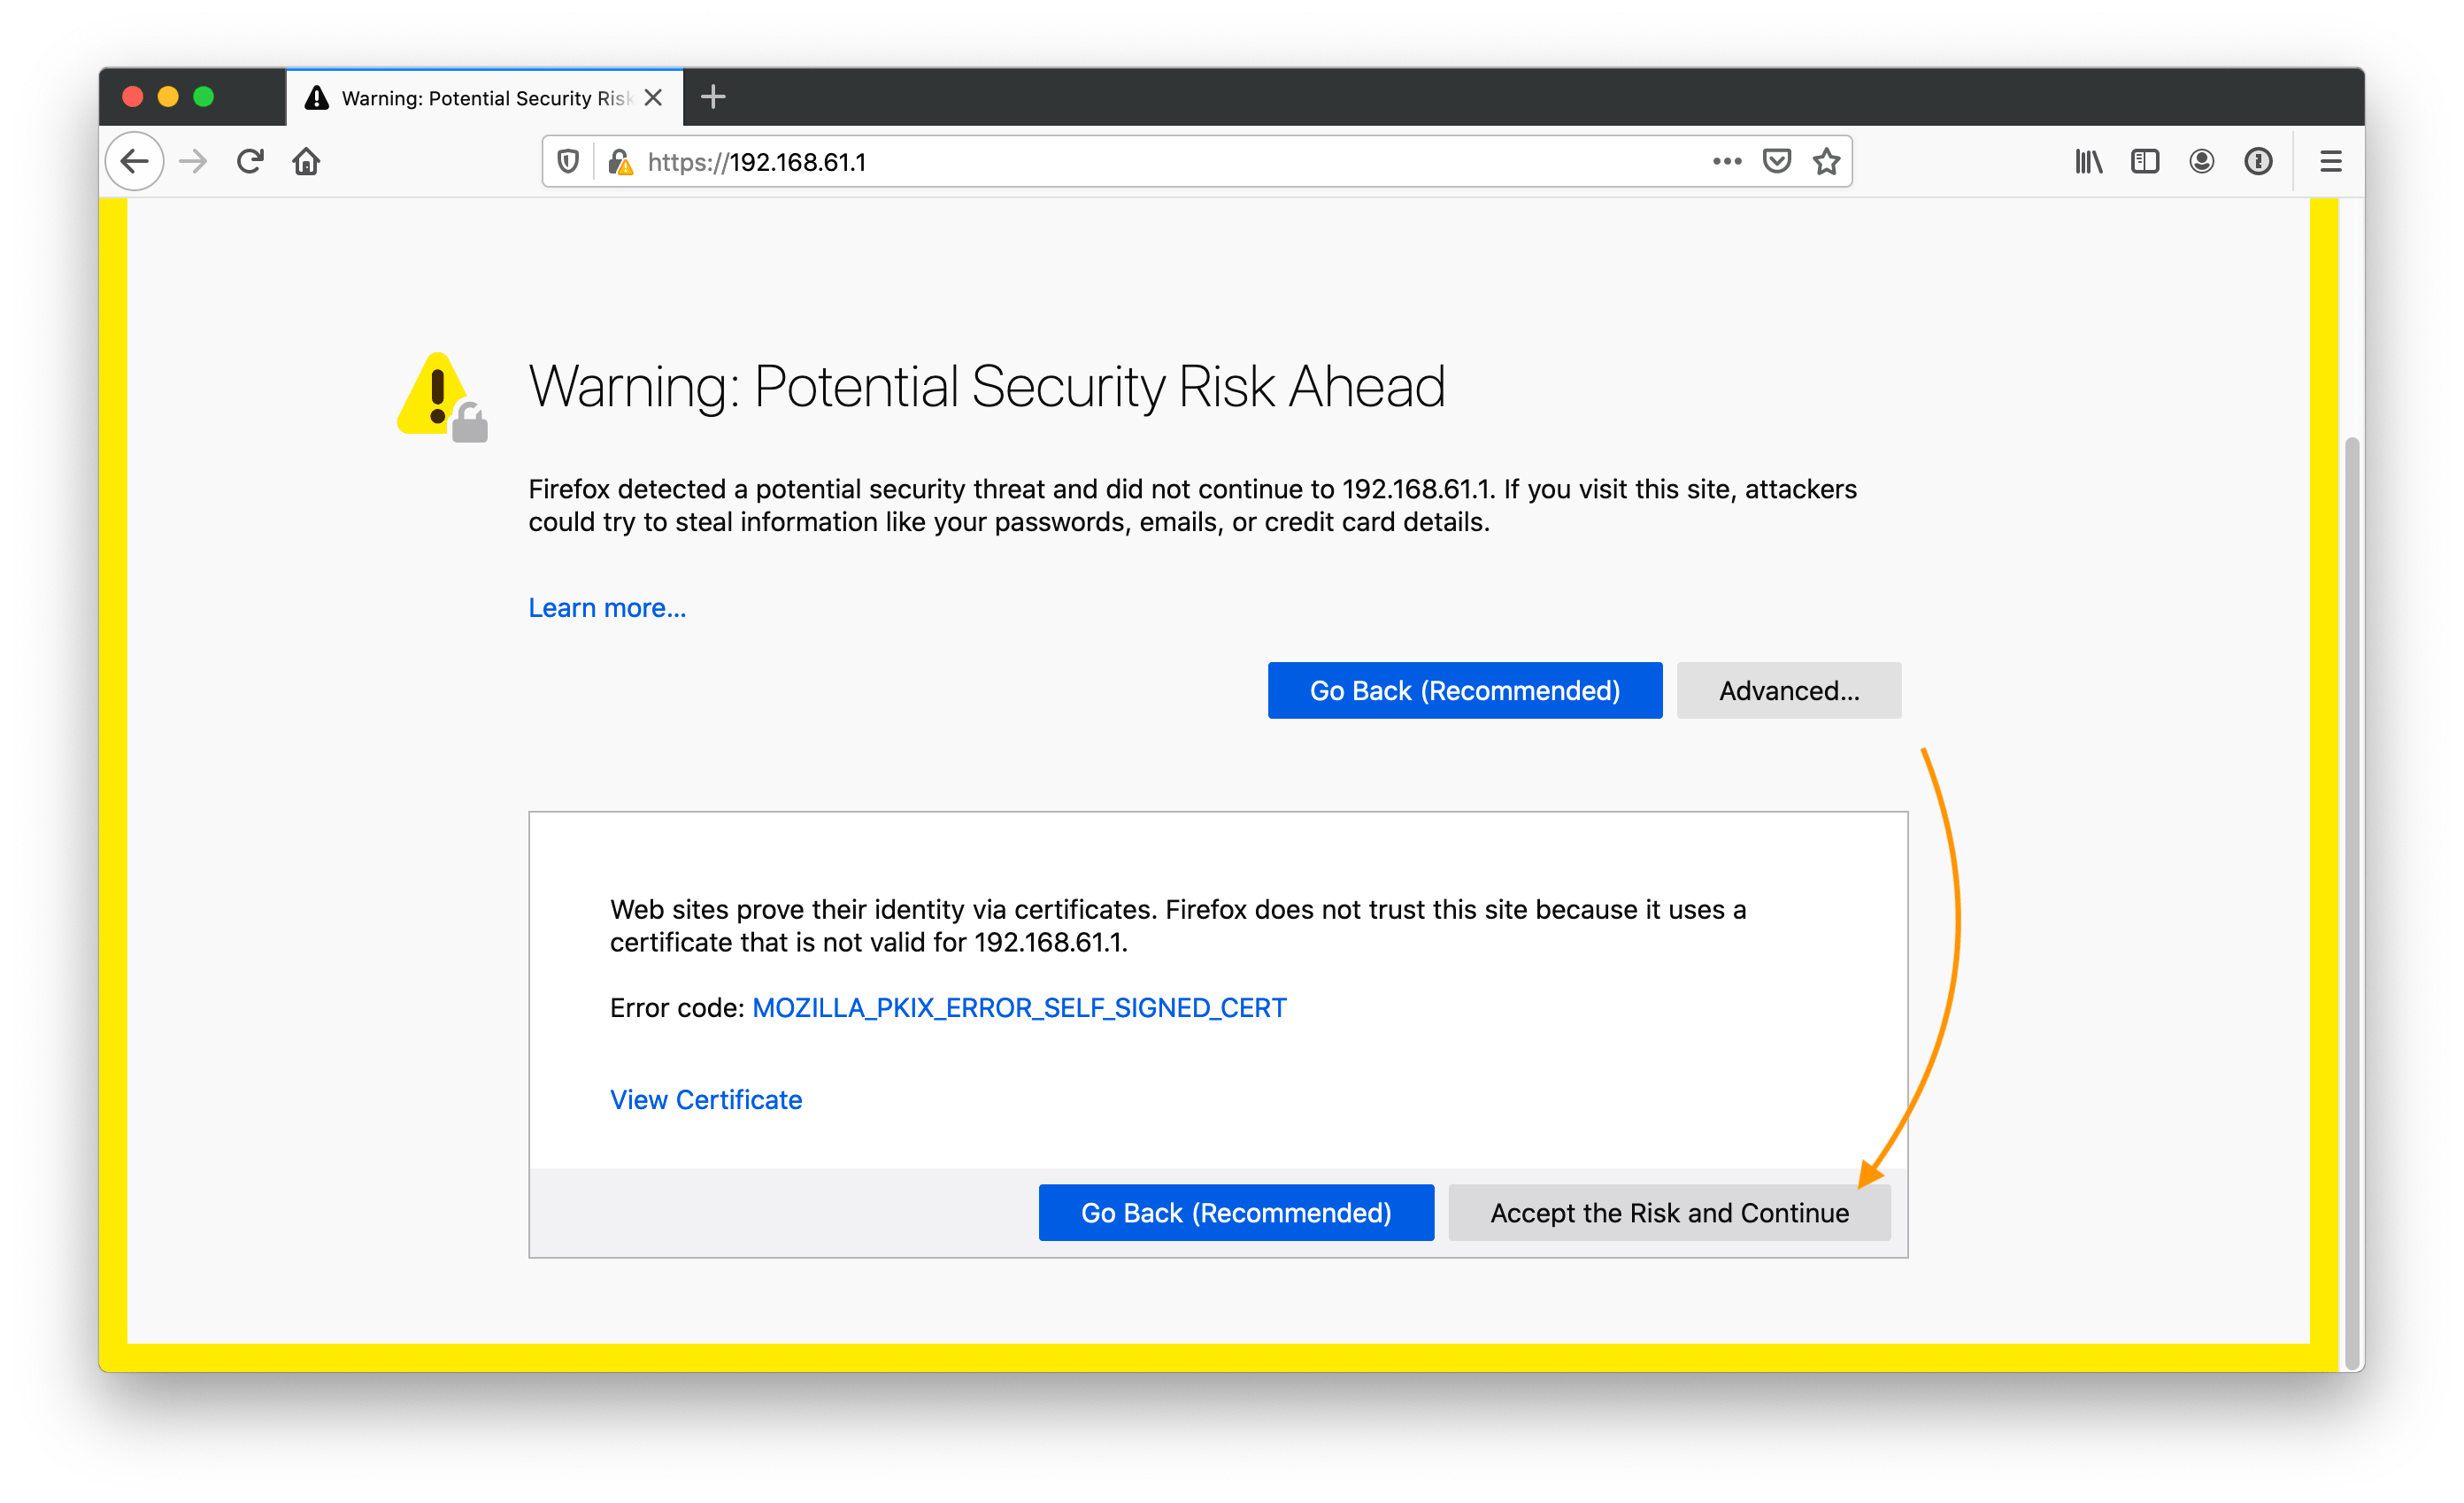 Firefox warning potential security risk ahead advanced